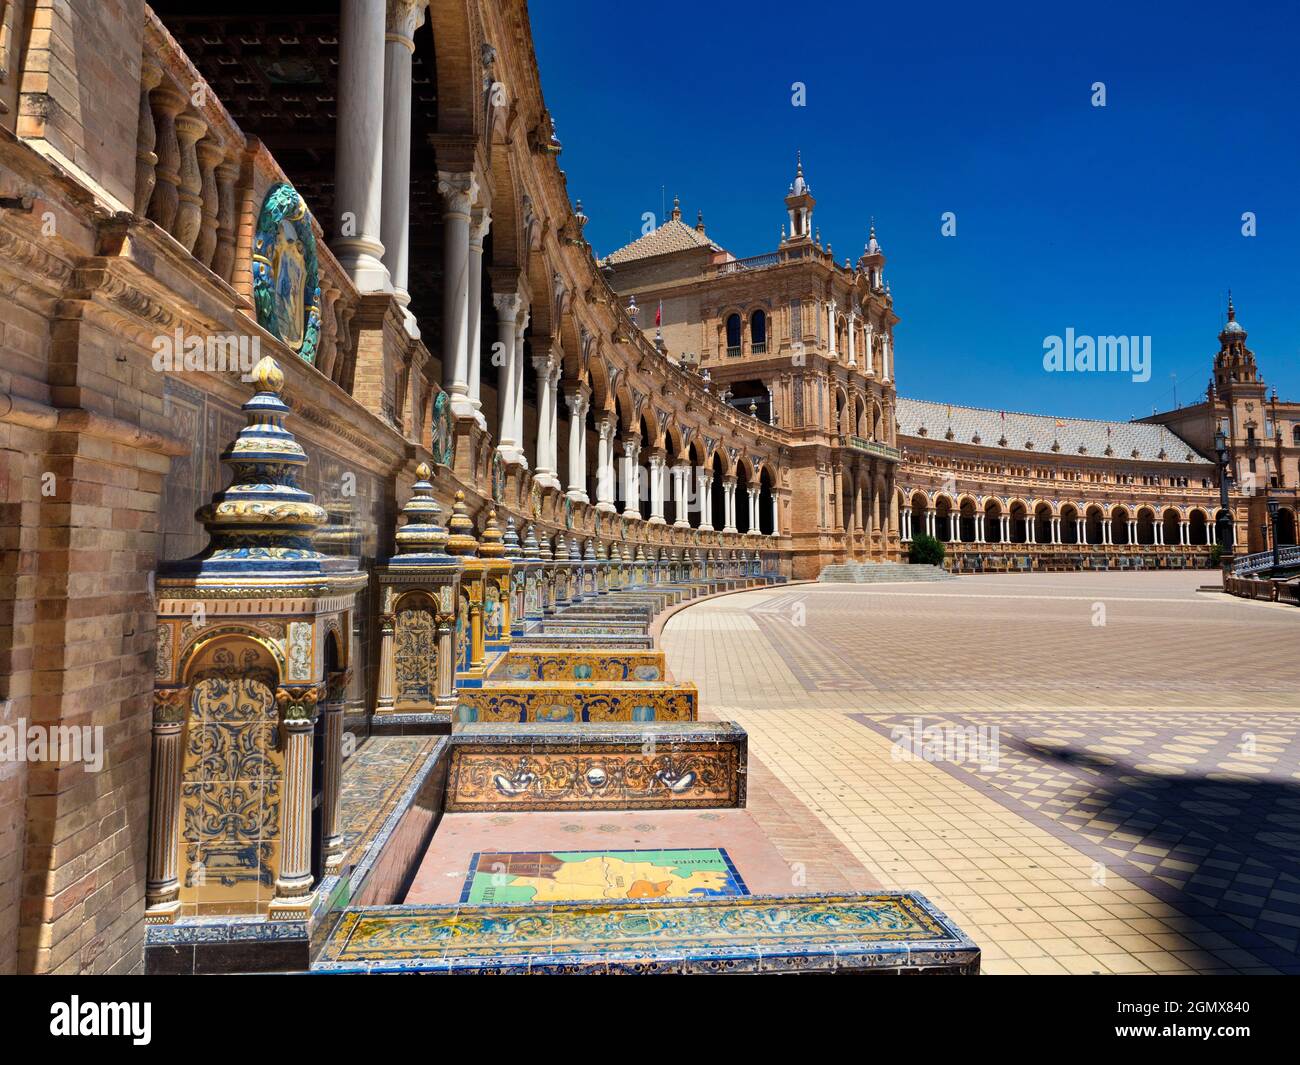 Seville, Andalucia, Spain - 31 May 2016; no people in view. Located in the Parque de Mar’a Luisa in Seville, Spain, the grandiose Plaza de Espa–a was Stock Photo